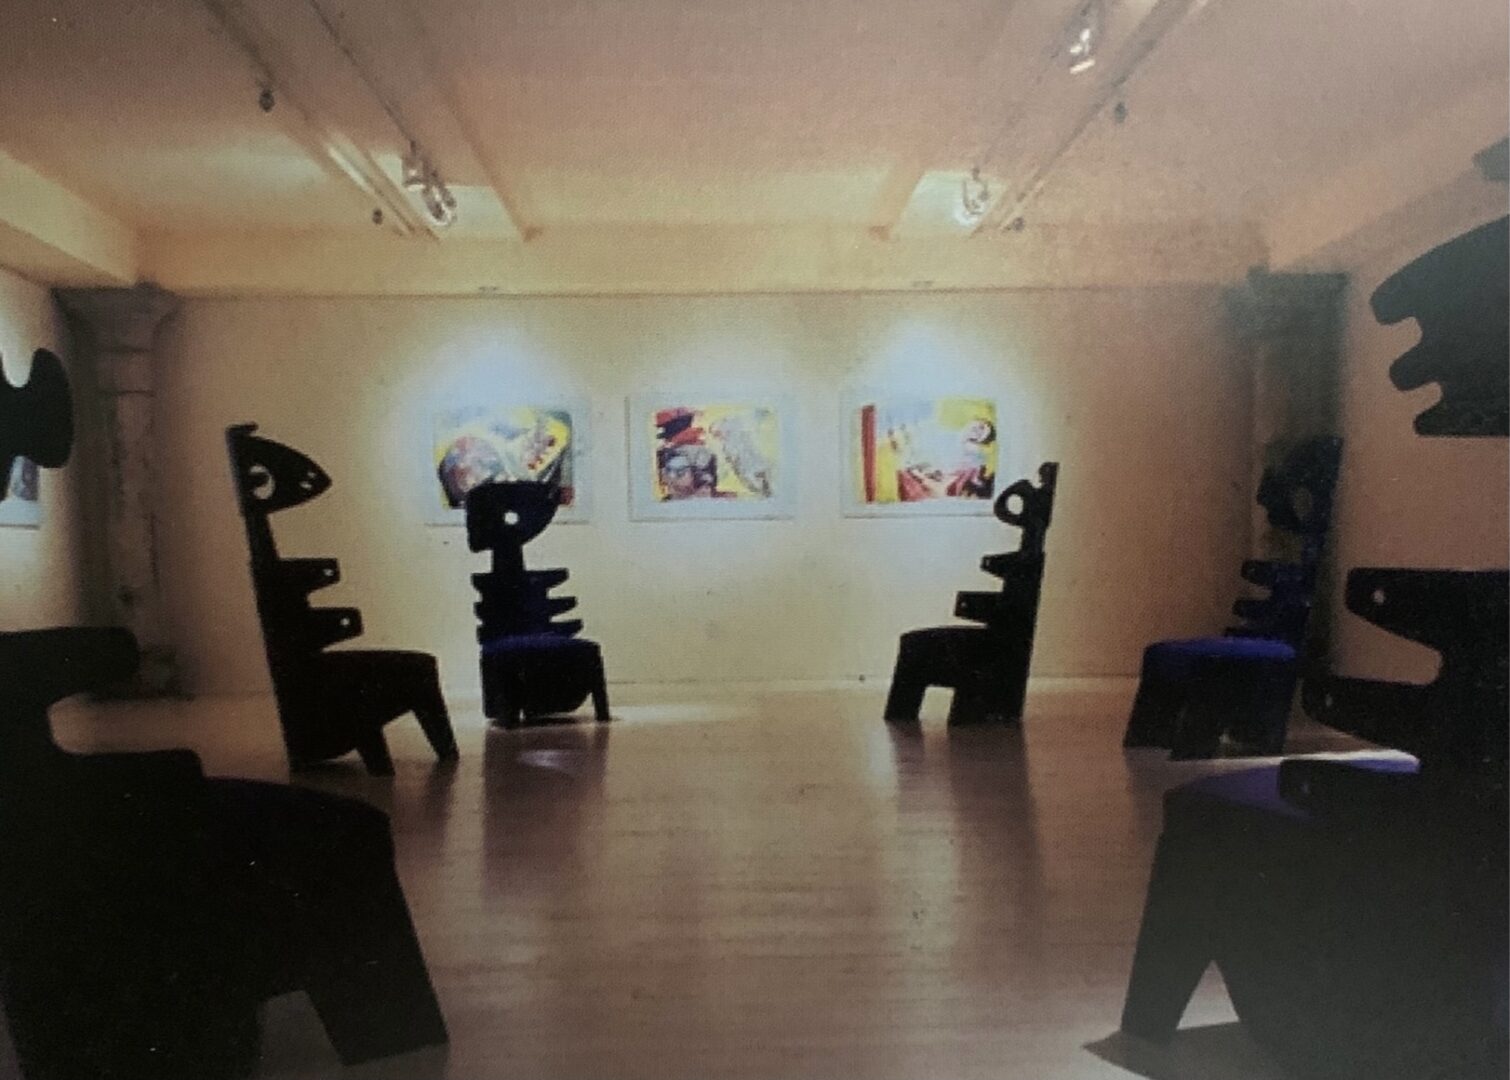 A room with several chairs and paintings on the wall.